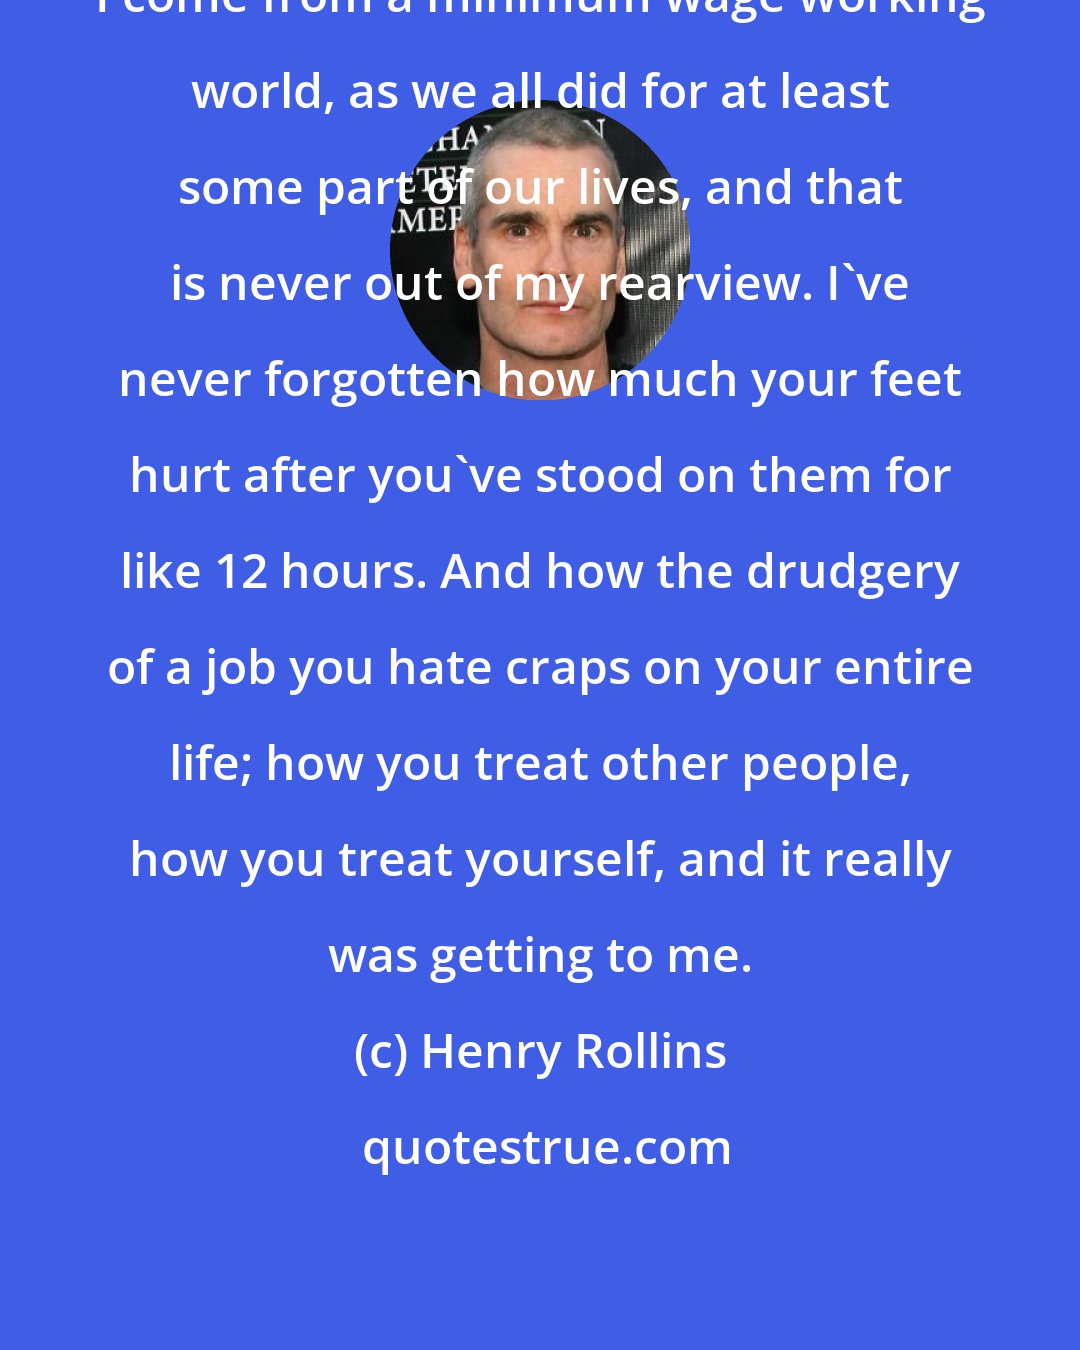 Henry Rollins: I come from a minimum wage working world, as we all did for at least some part of our lives, and that is never out of my rearview. I've never forgotten how much your feet hurt after you've stood on them for like 12 hours. And how the drudgery of a job you hate craps on your entire life; how you treat other people, how you treat yourself, and it really was getting to me.